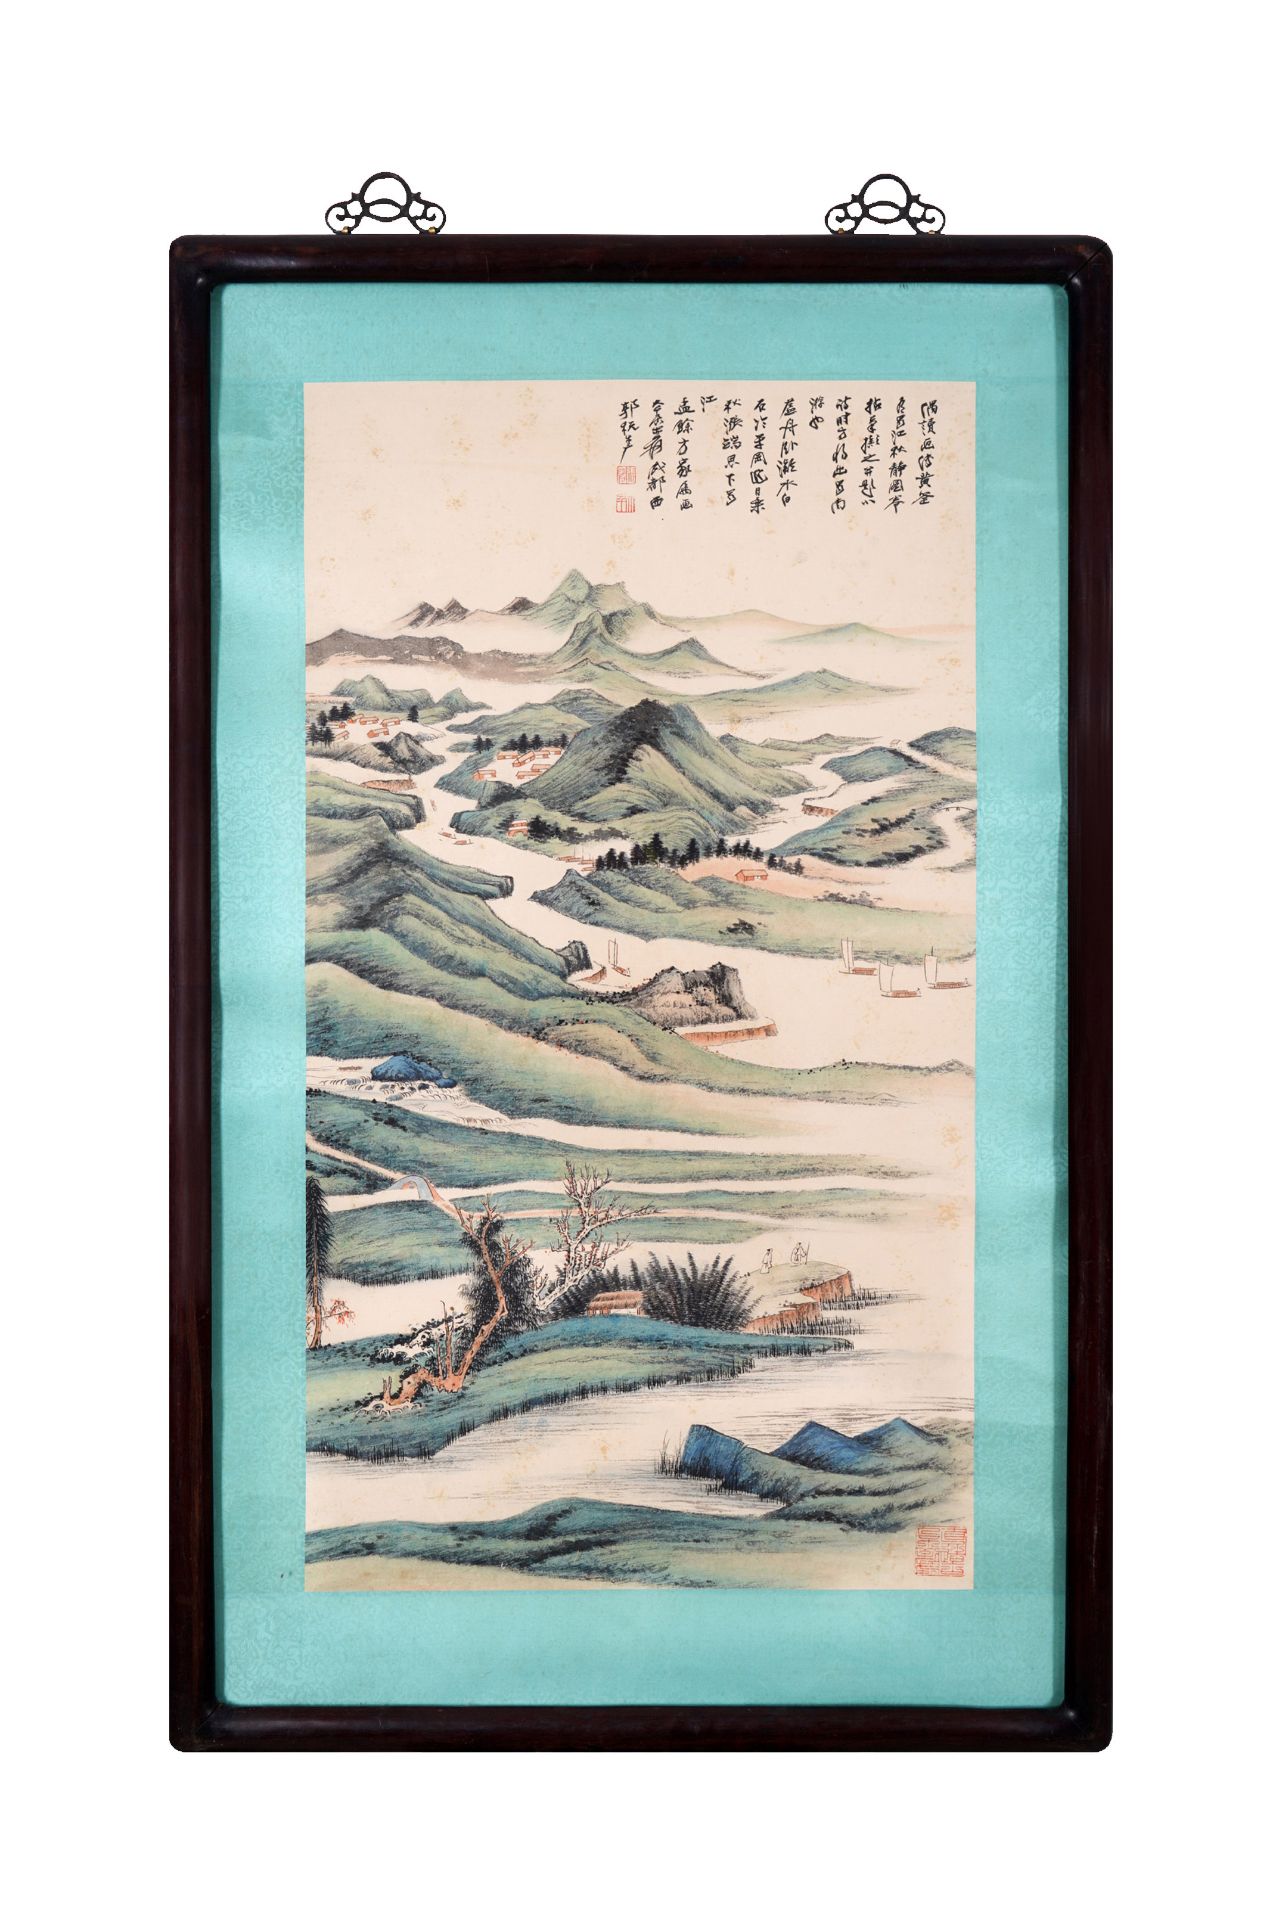 A Chinese Frame Painting By Zhang Daqian - Image 2 of 19